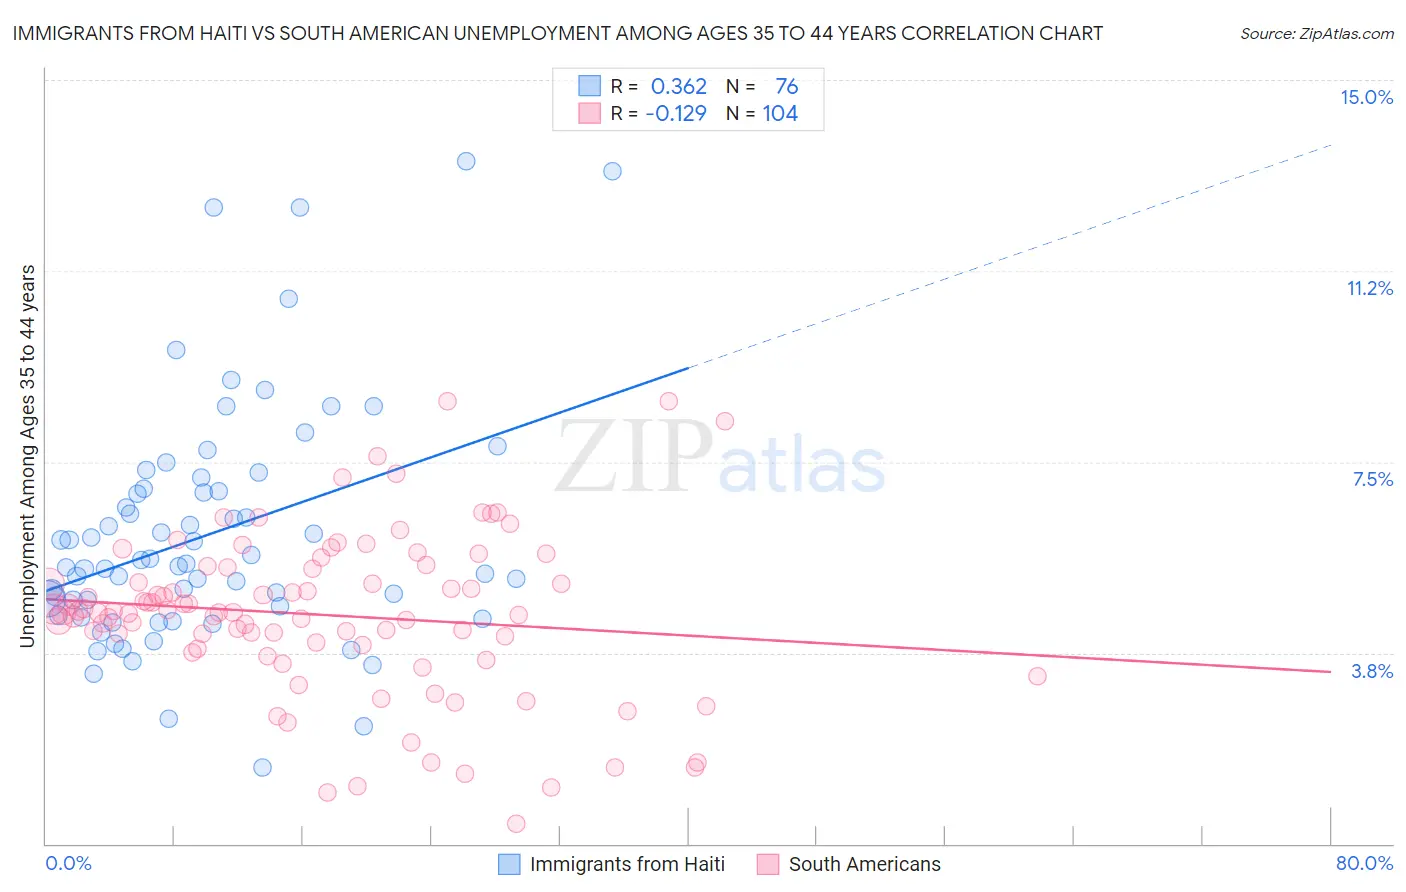 Immigrants from Haiti vs South American Unemployment Among Ages 35 to 44 years